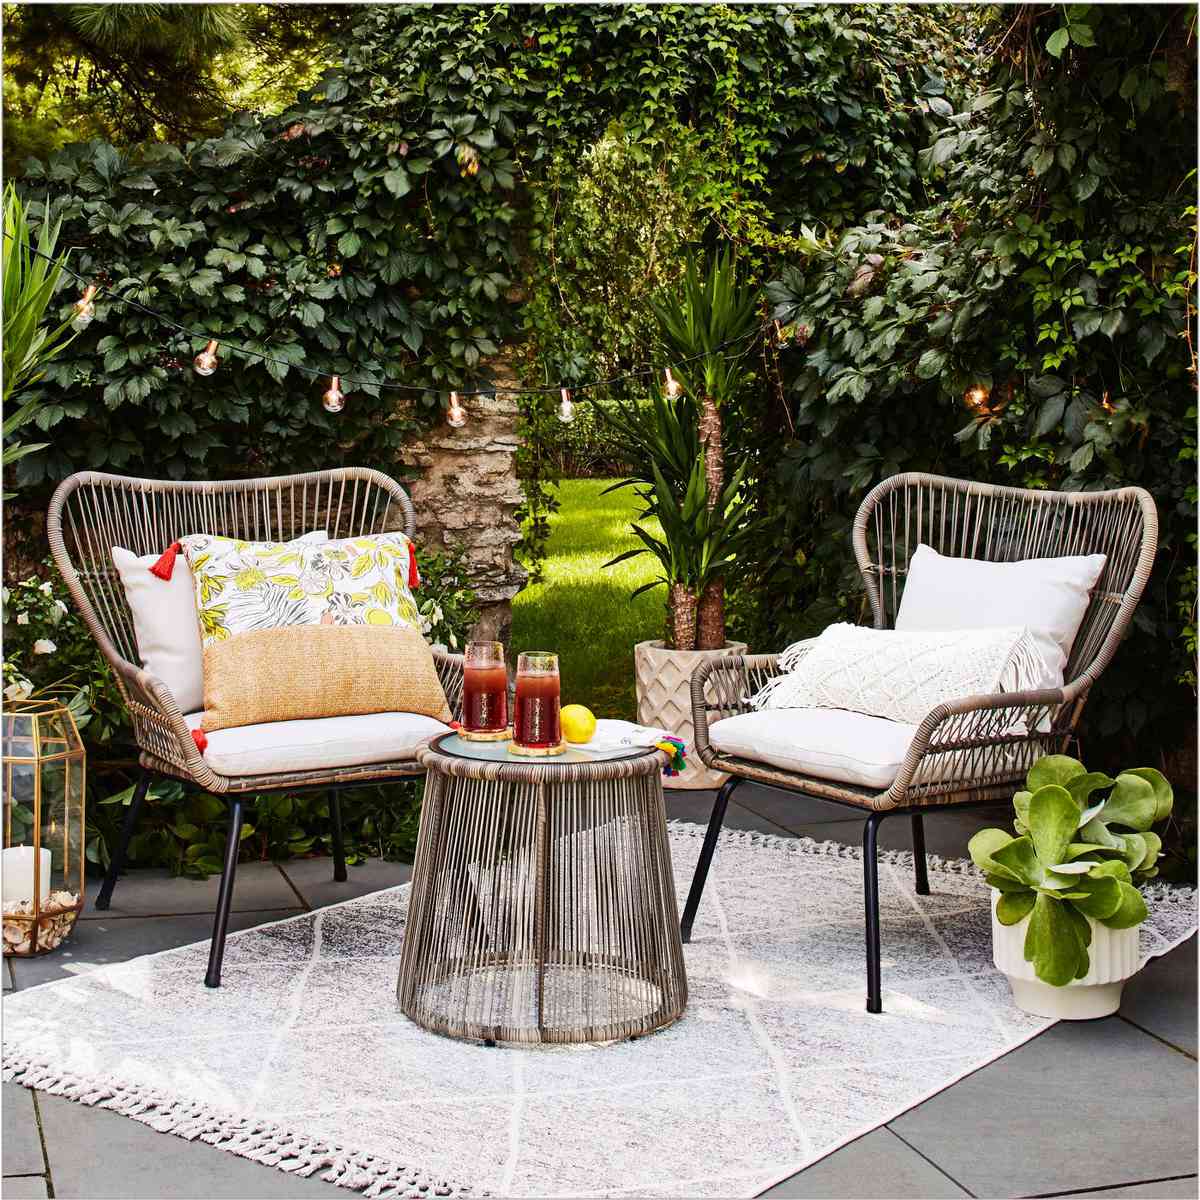 Best Outdoor Furniture For Small Spaces, Small Scale Outdoor Dining Furniture